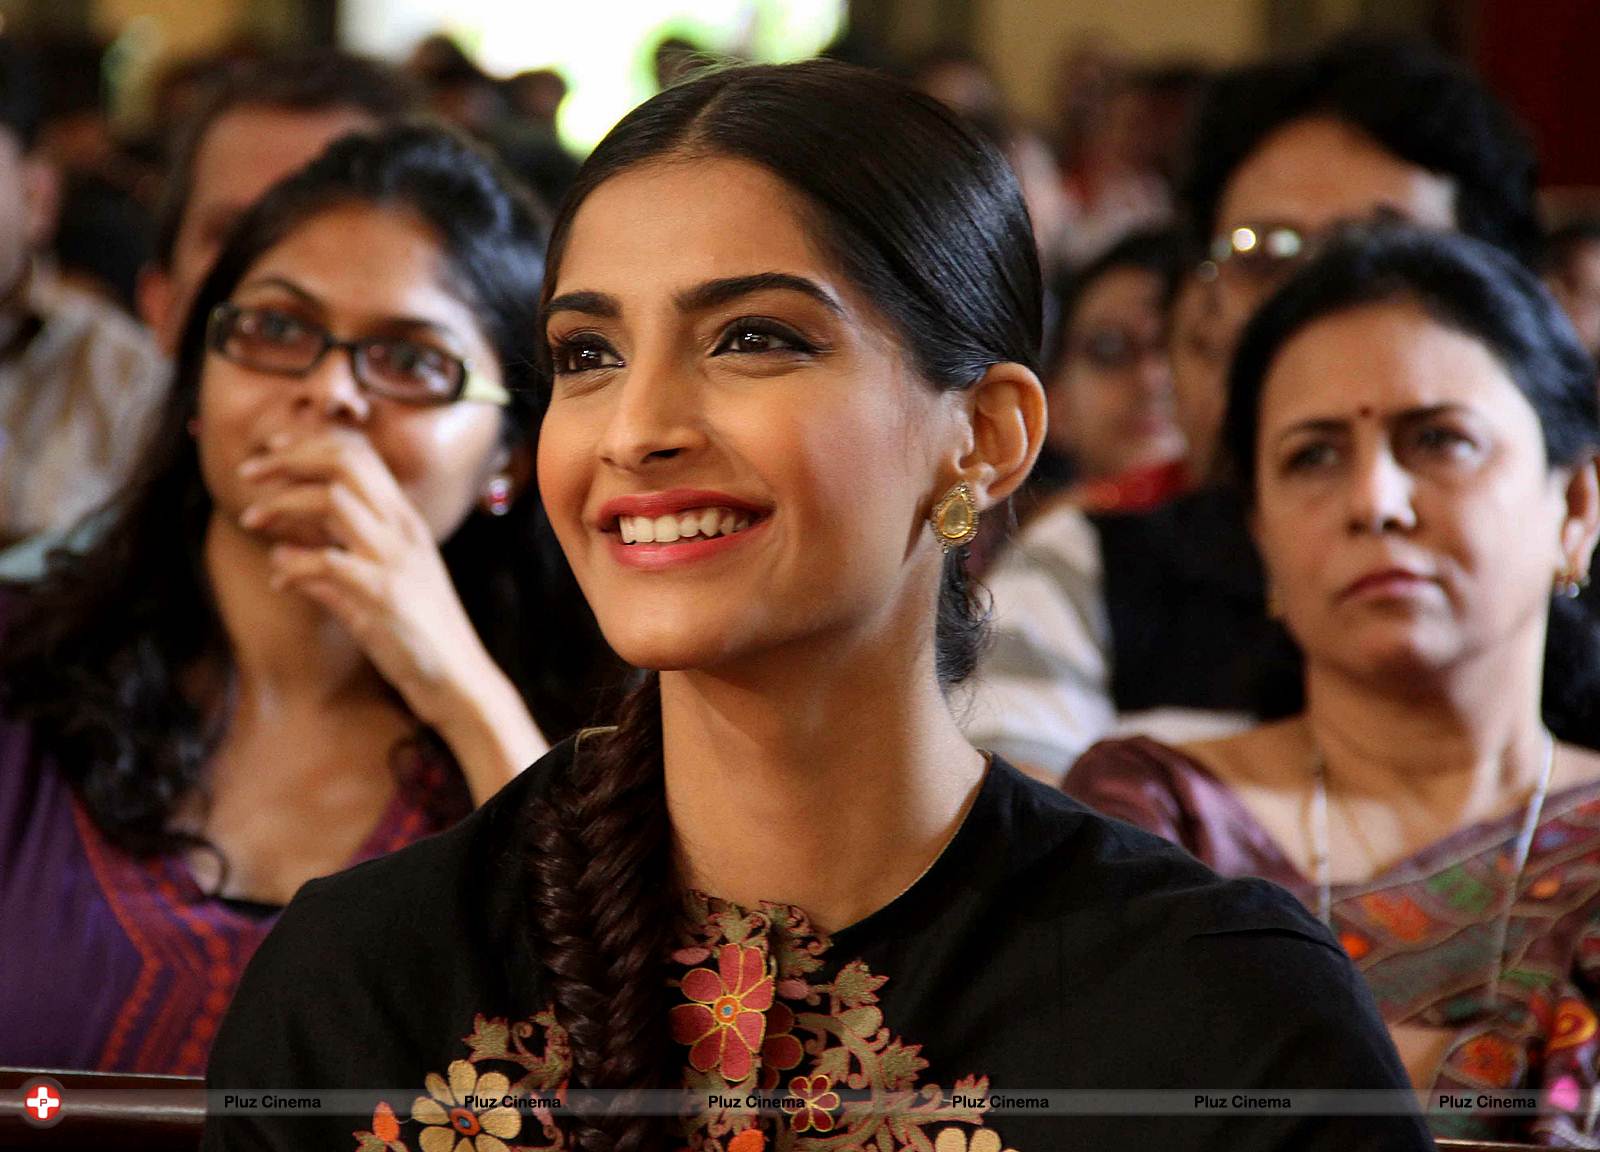 Sonam Kapoor Ahuja - Navbharat Times panel discussion on Youth Day Photos | Picture 534938